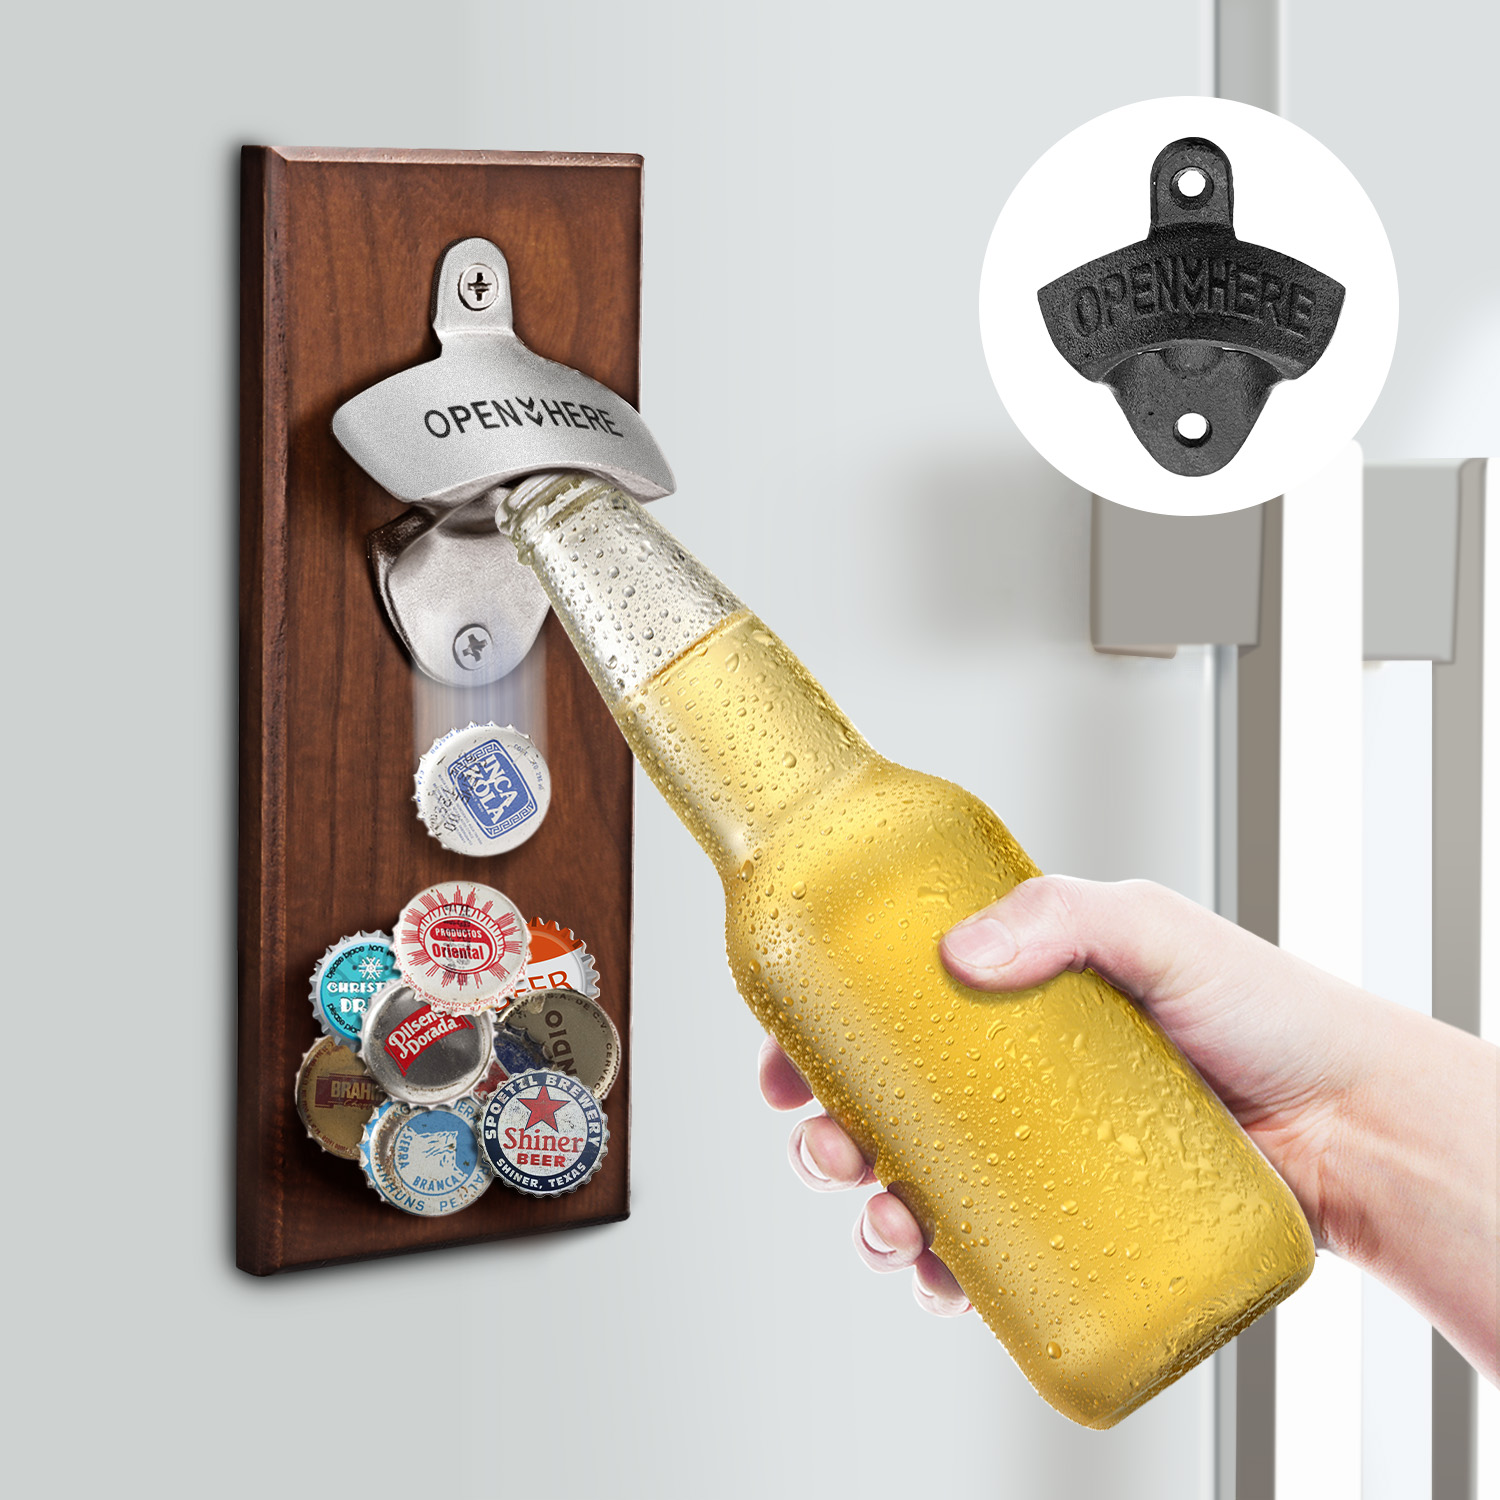 Wooden-Bottle-Opener-Wall-Mounted-Magnetic-Bottle-Openers-with-Cap-Catch-1964775-1